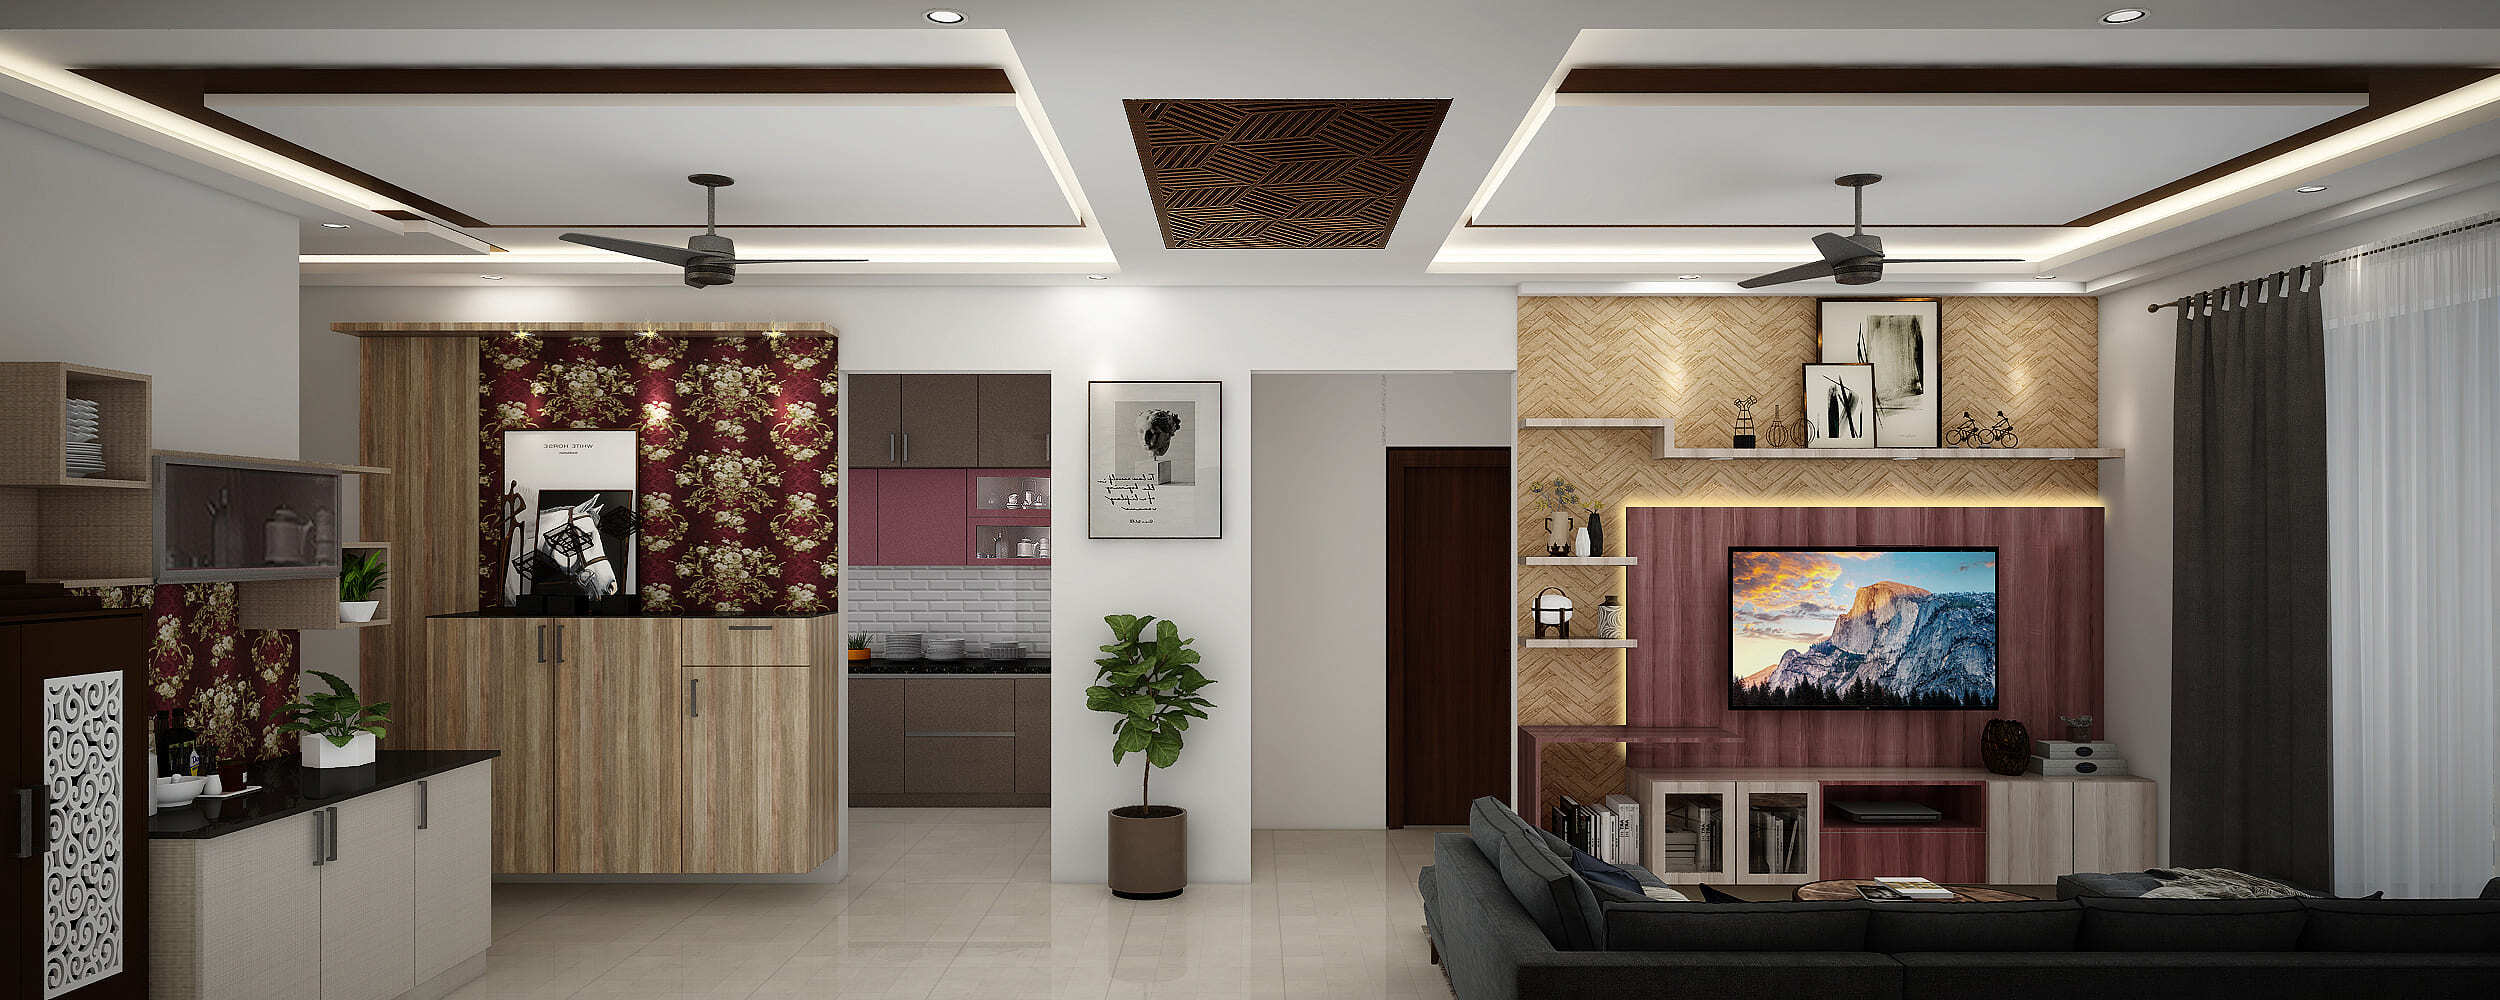 Home interior designers in Bangalore - An Ultimate Guide about Living Room Interior Design Styles